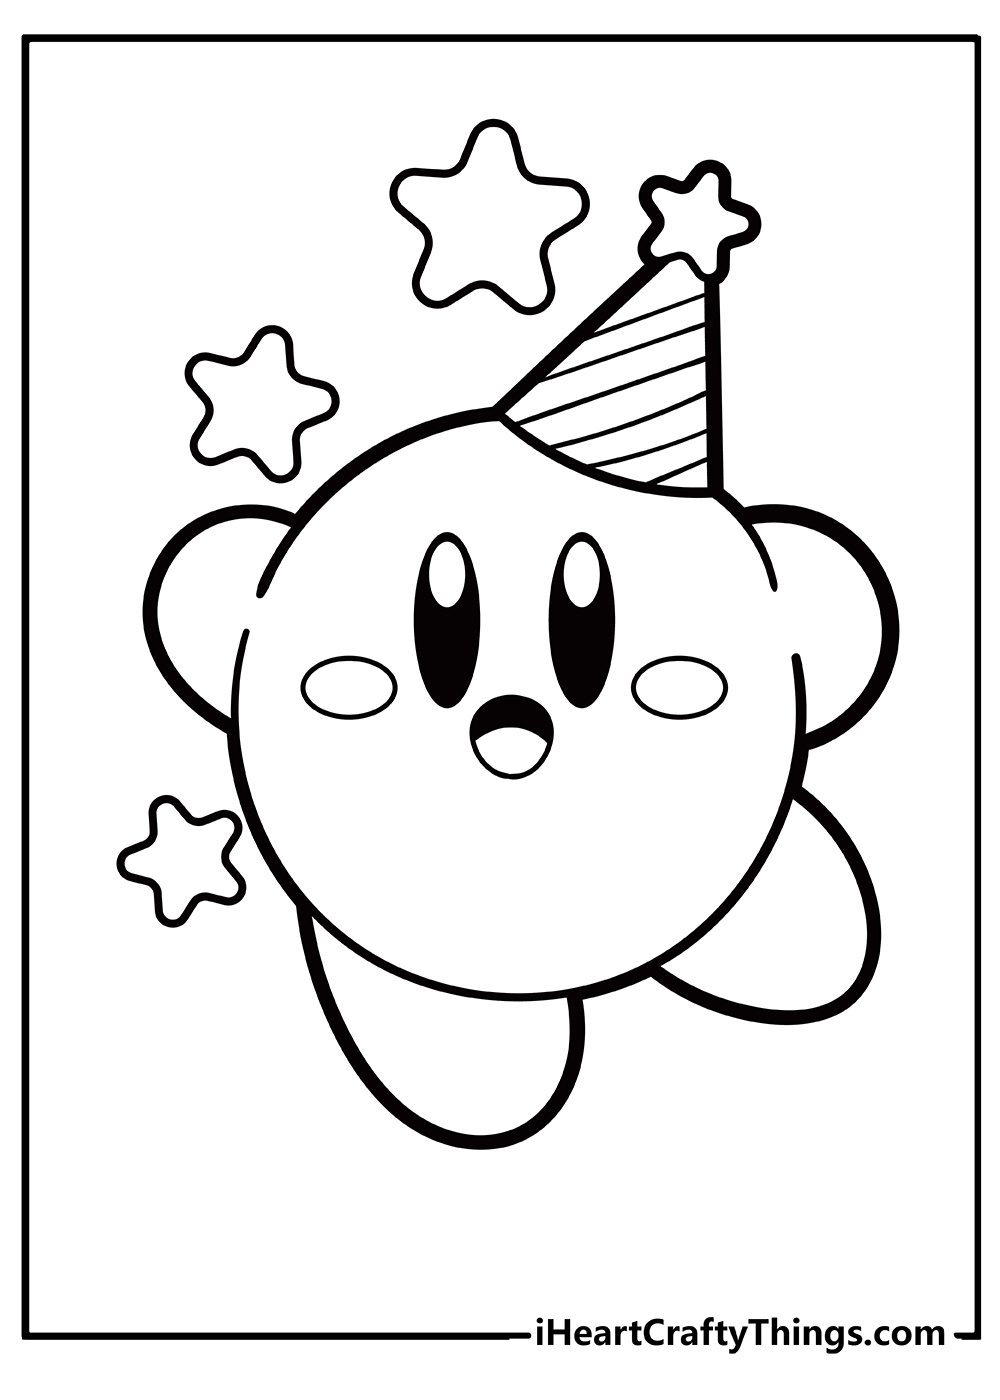 Kirby Coloring Book for adults free download